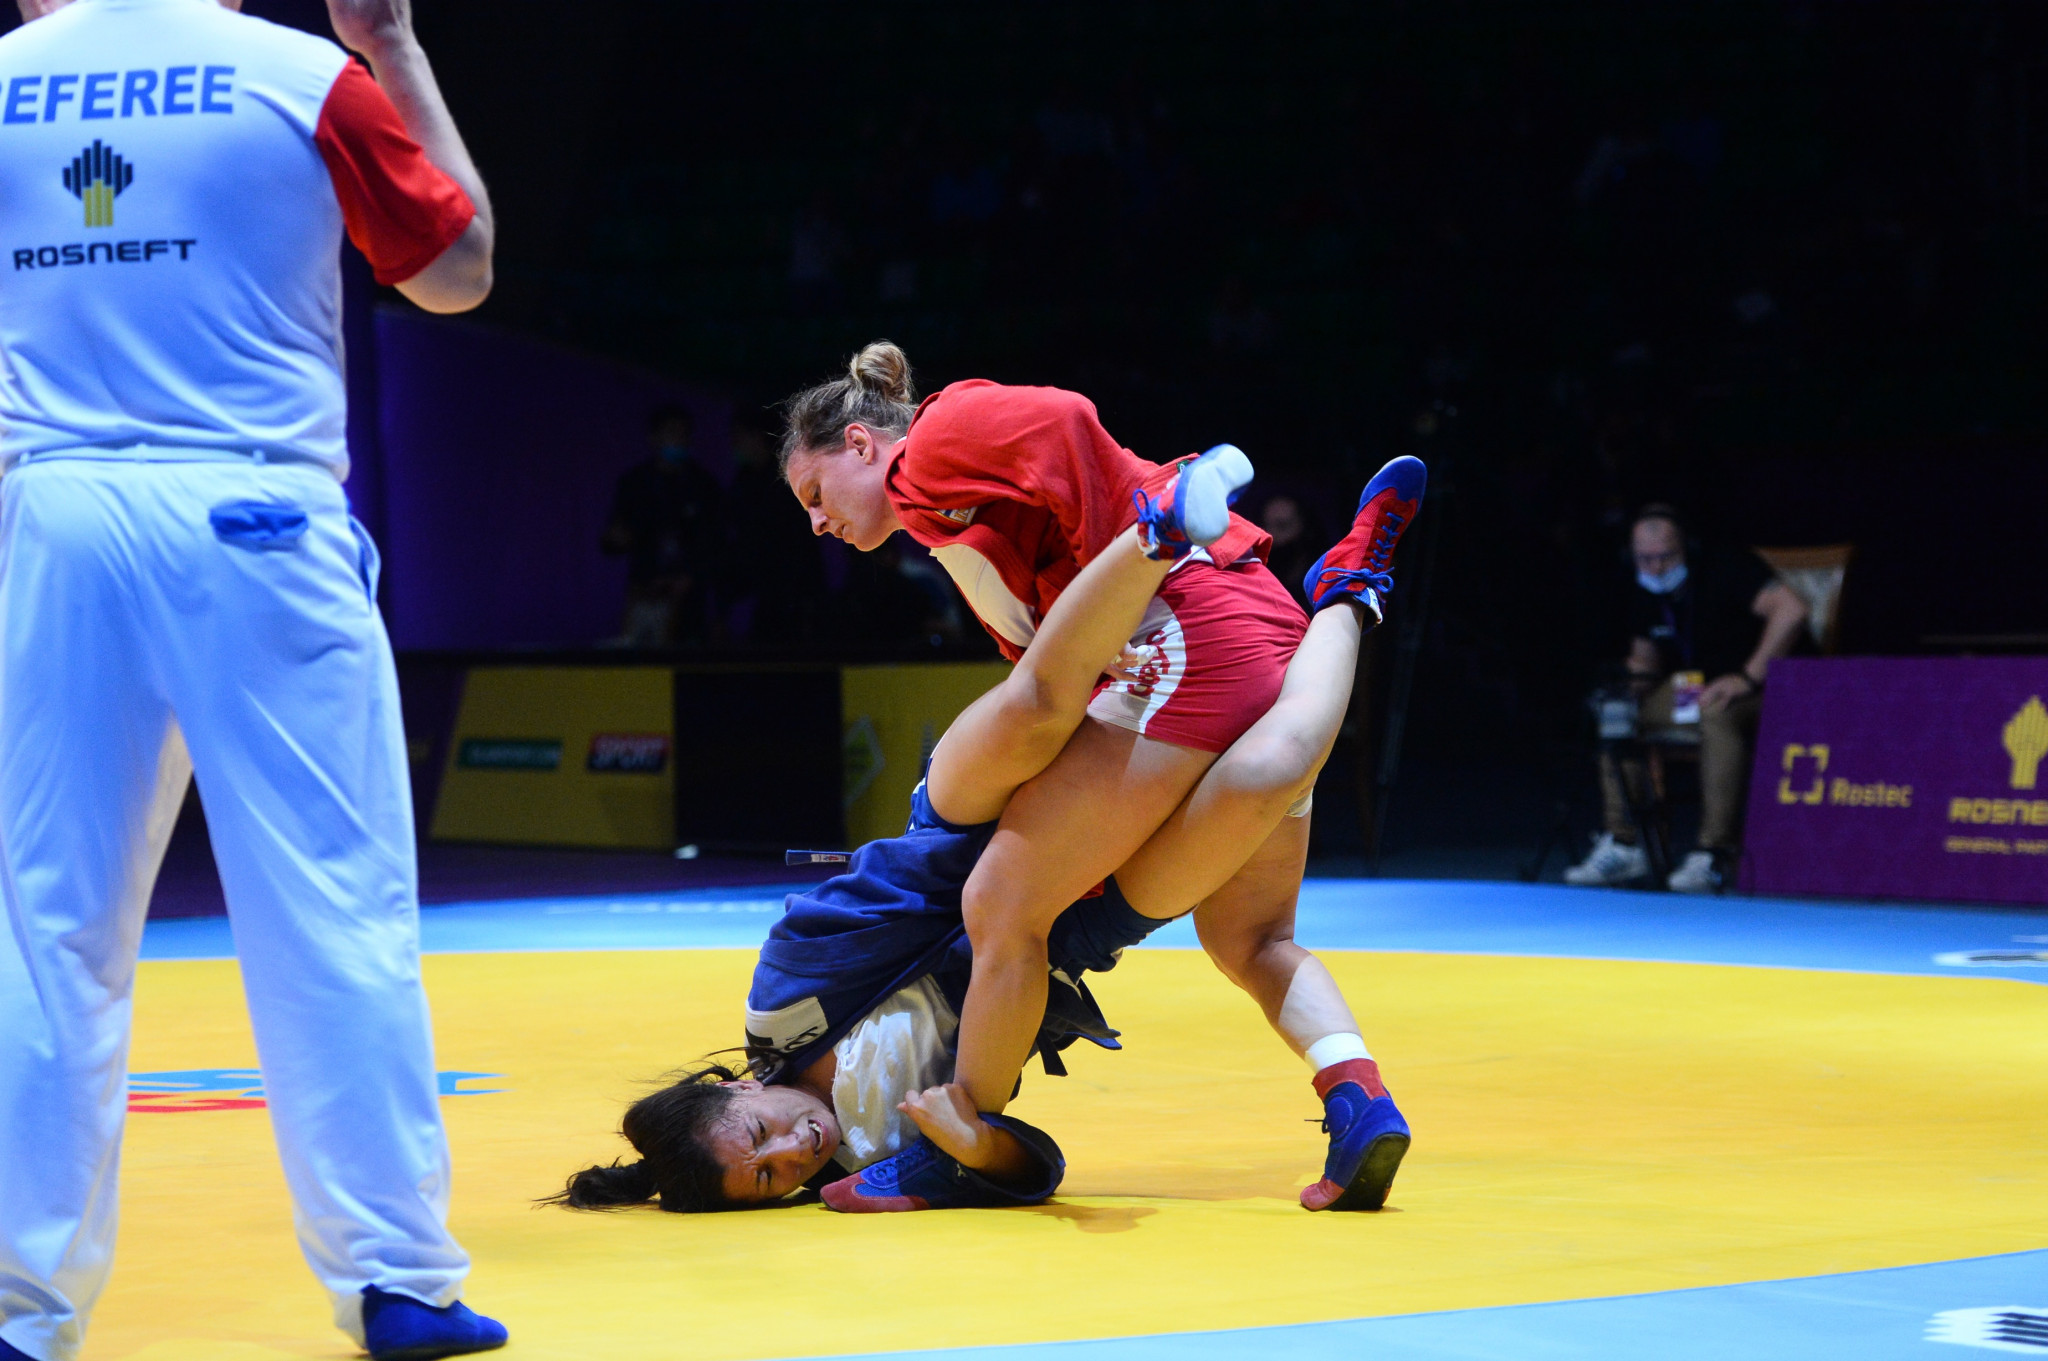 Athletes were given the chance to vote for three representatives from 10 candidates at the recent World Sambo Championships in Tashkent ©FIAS